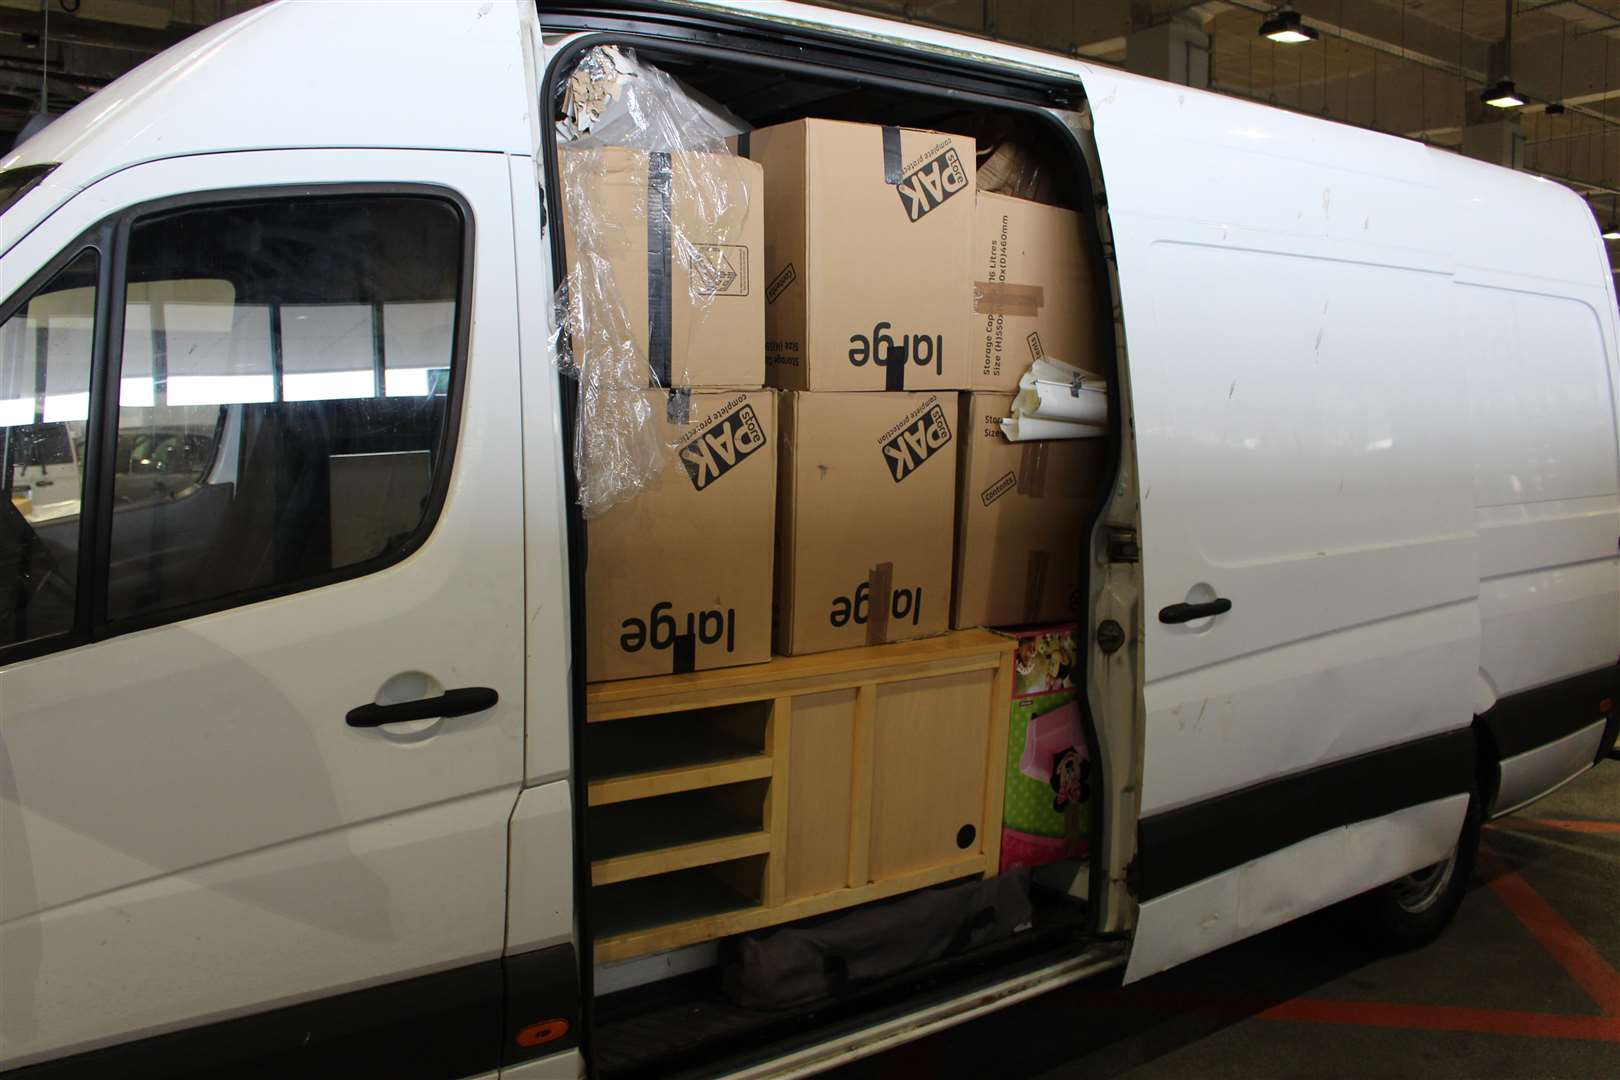 The migrants were hidden behind boxes in vans. Picture: Home Office